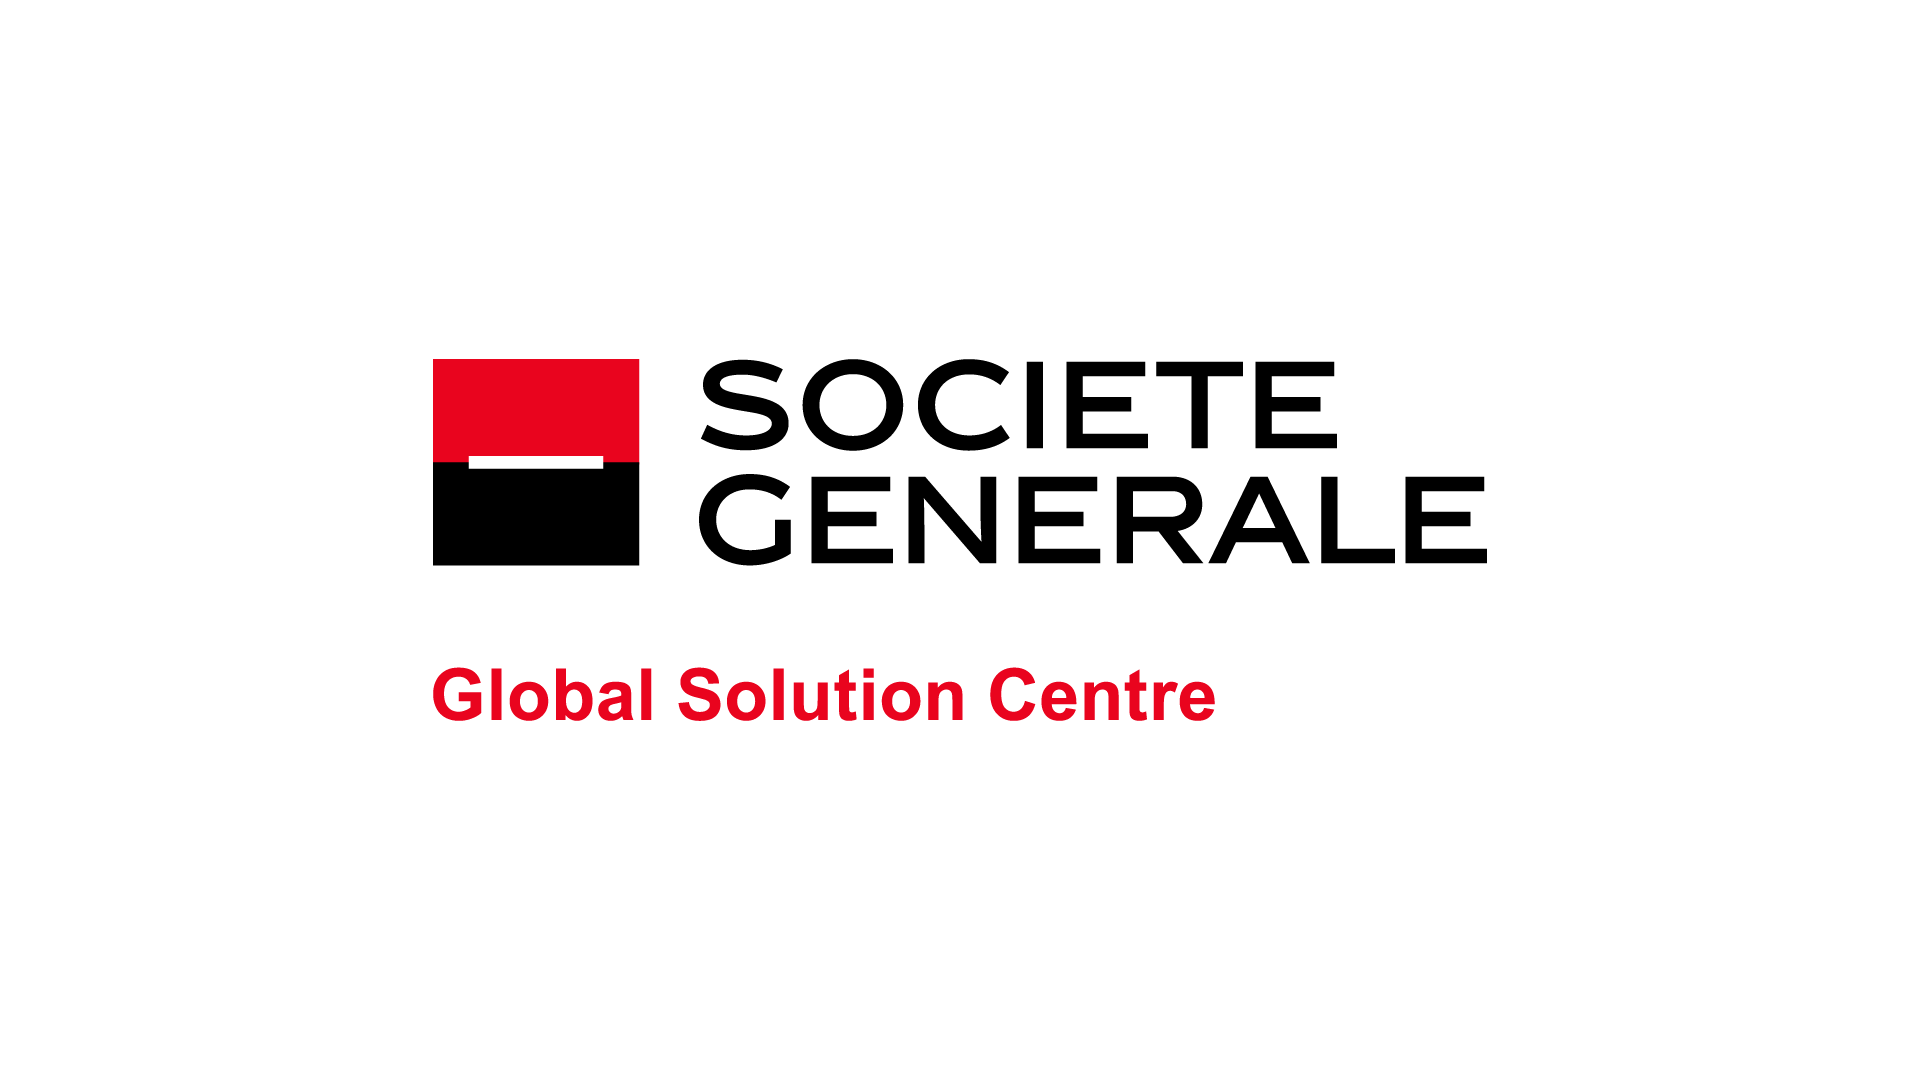 From European to Global: Societe Generale’s service centre in Romania becomes Societe Generale Global Solution Centre